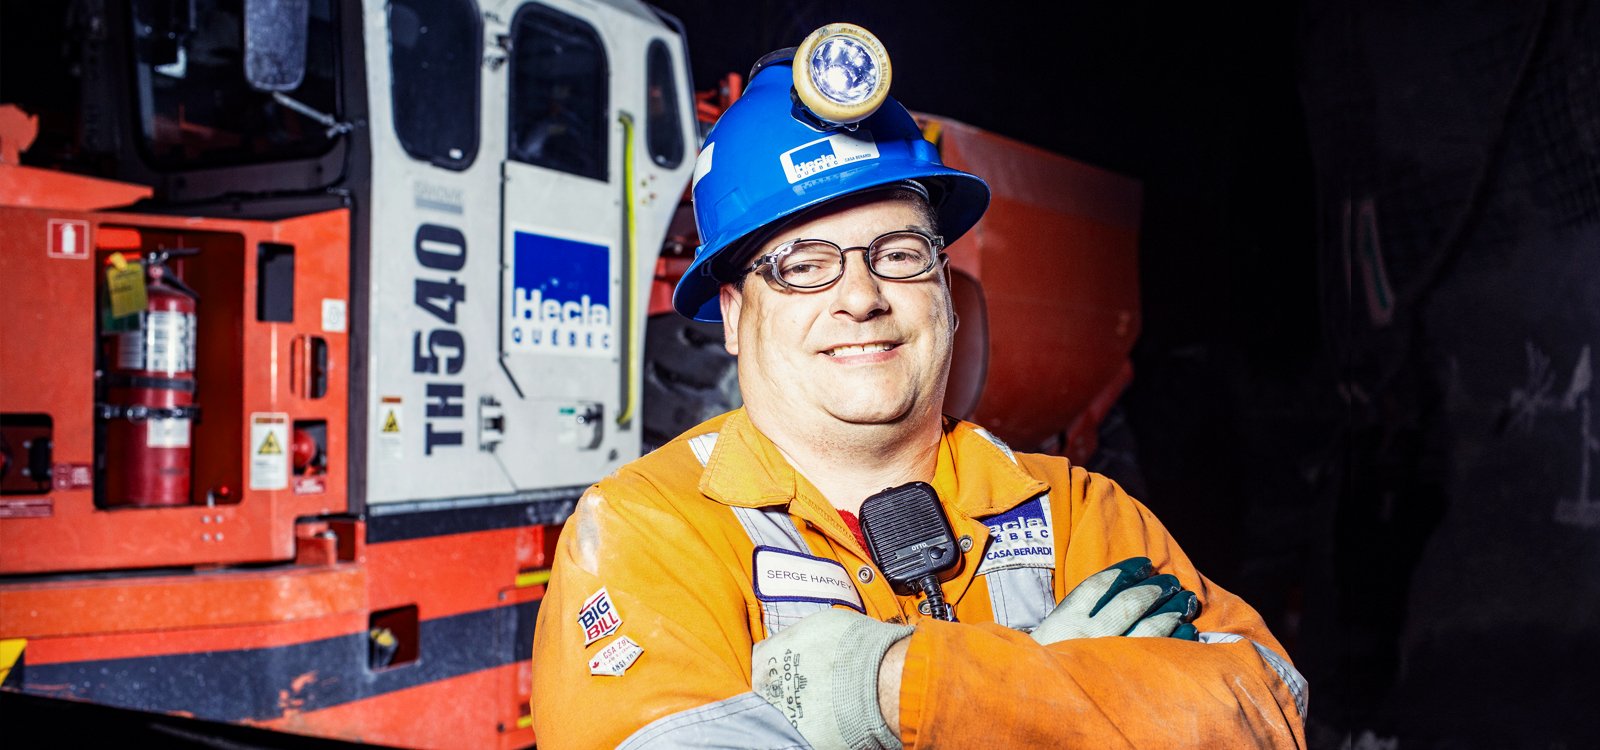 Automation was the key to improving operations at Hecla’s Casa Berardi mine.